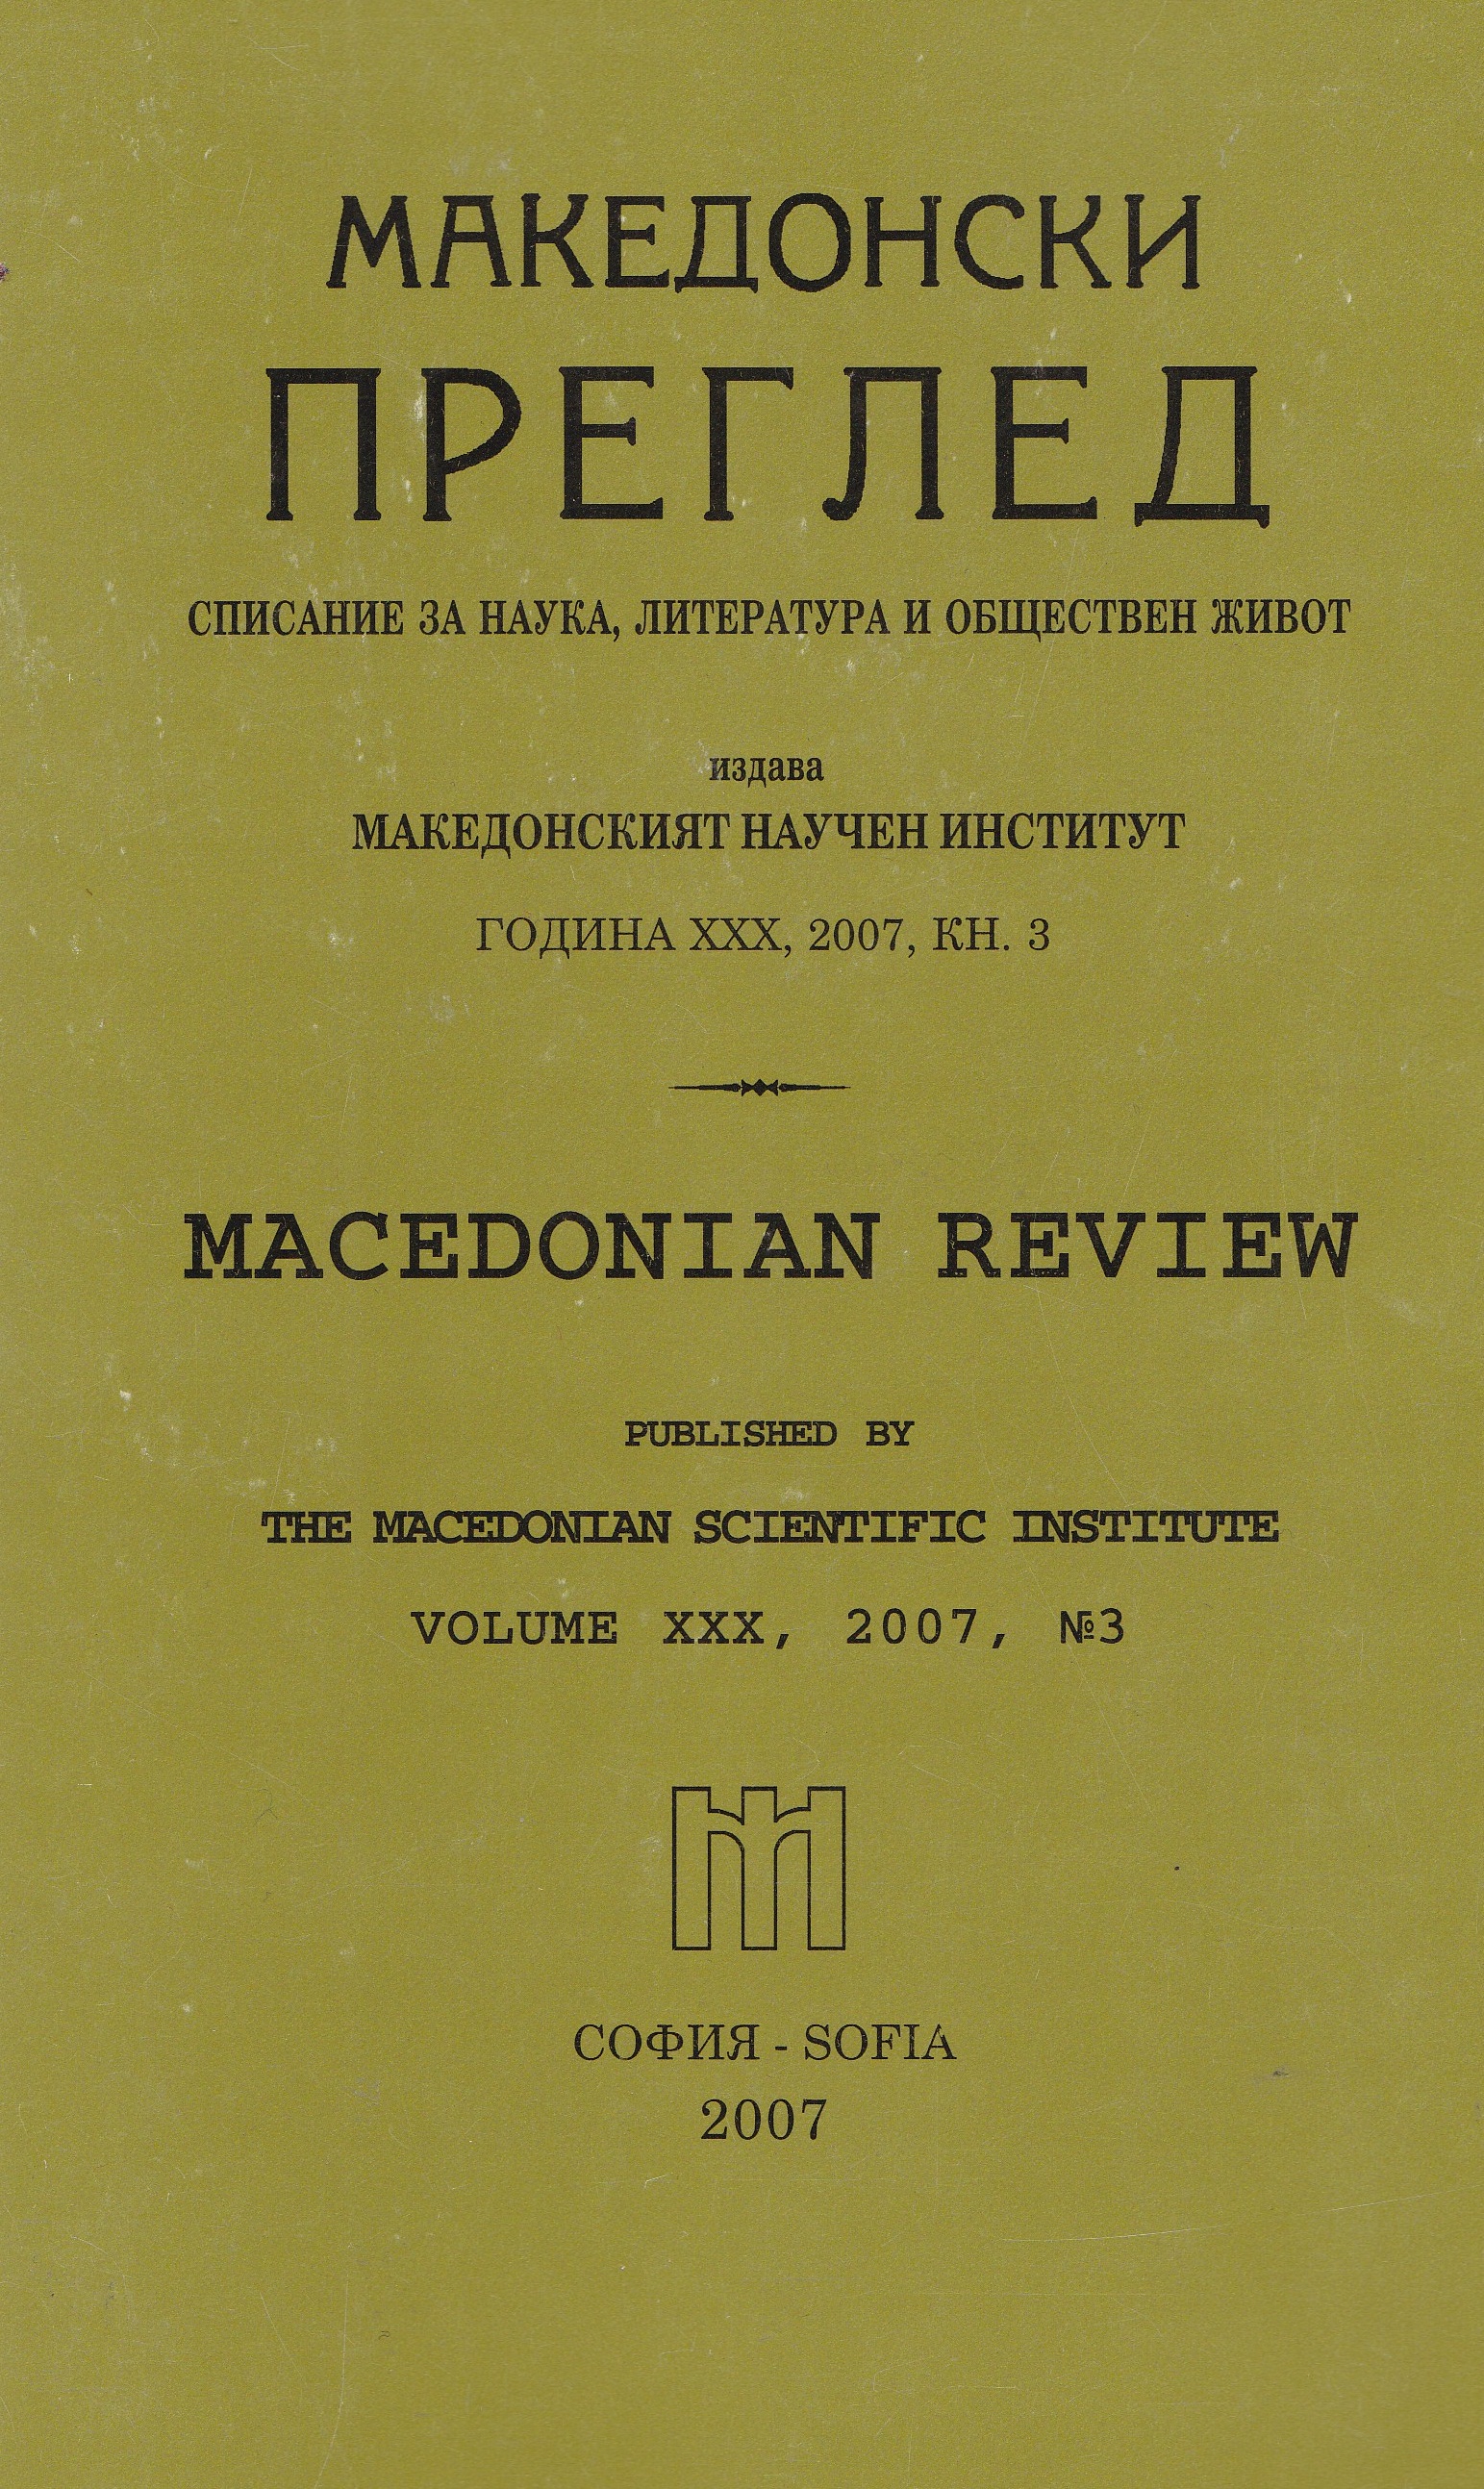 The Library clubs in Vardar Macedonia 1941-1944 Cover Image